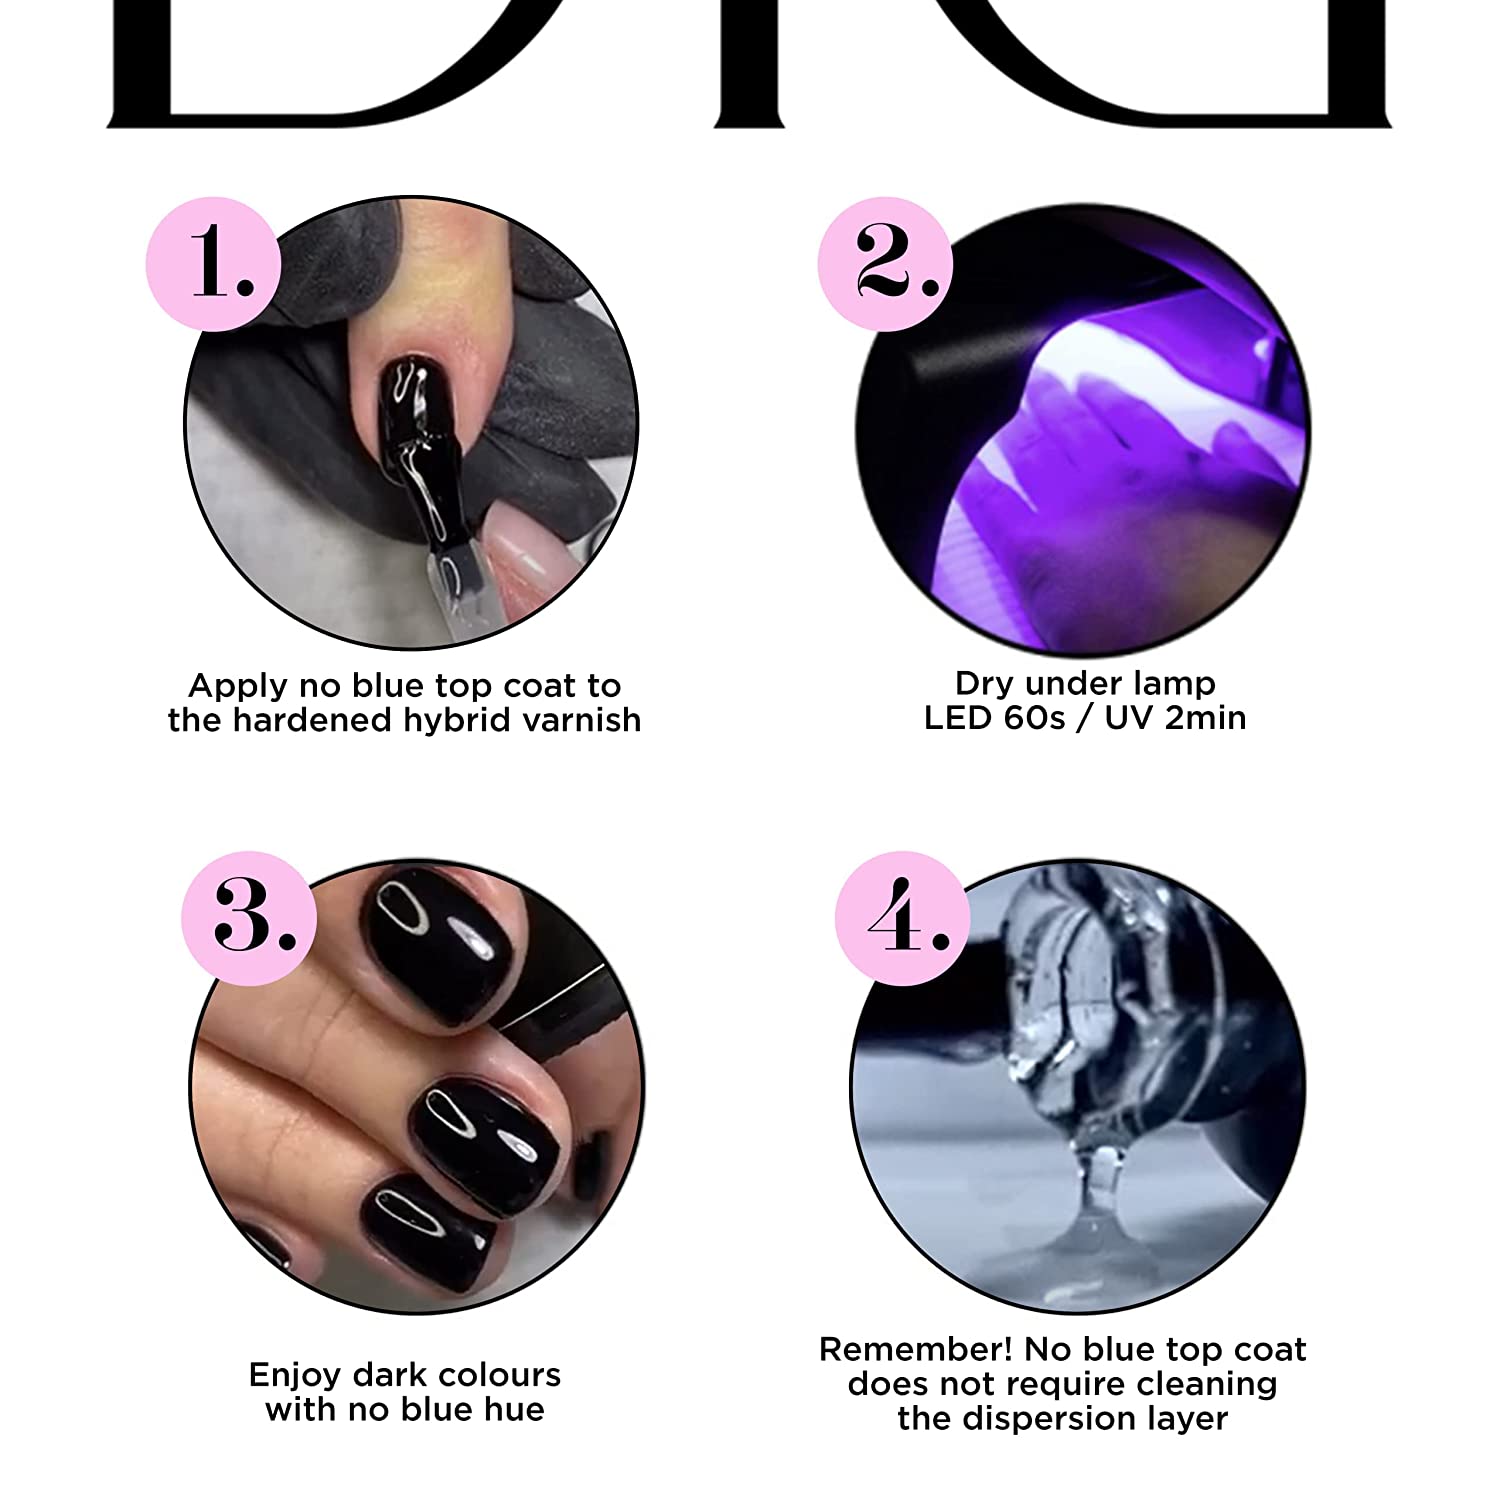 Premium Top Coat No Blue - Didier Lab - Elite Top Coat - Protection from Scratches - No Dispersion Layer - Hybrid Varnish - Nail Polish - for UV Lamp - Resistance - Durability - Shine - Manicure Pedicure, ‎no